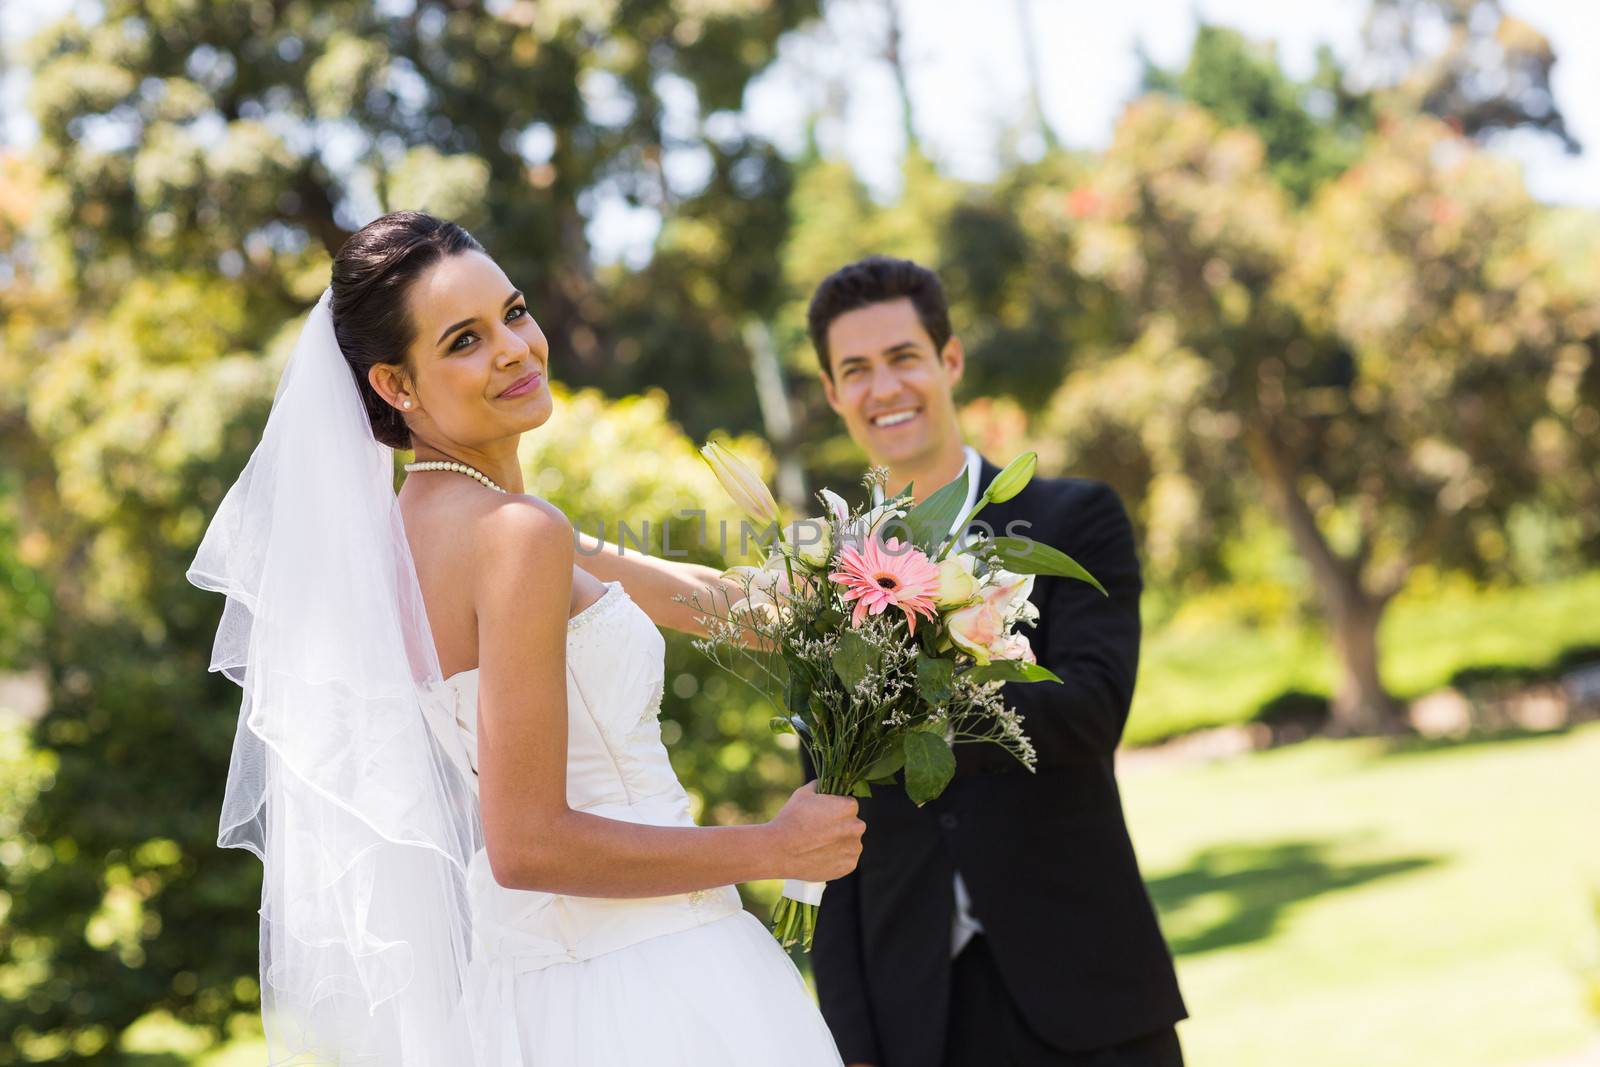 Portrait of a happy newlywed couple with bouquet in the park